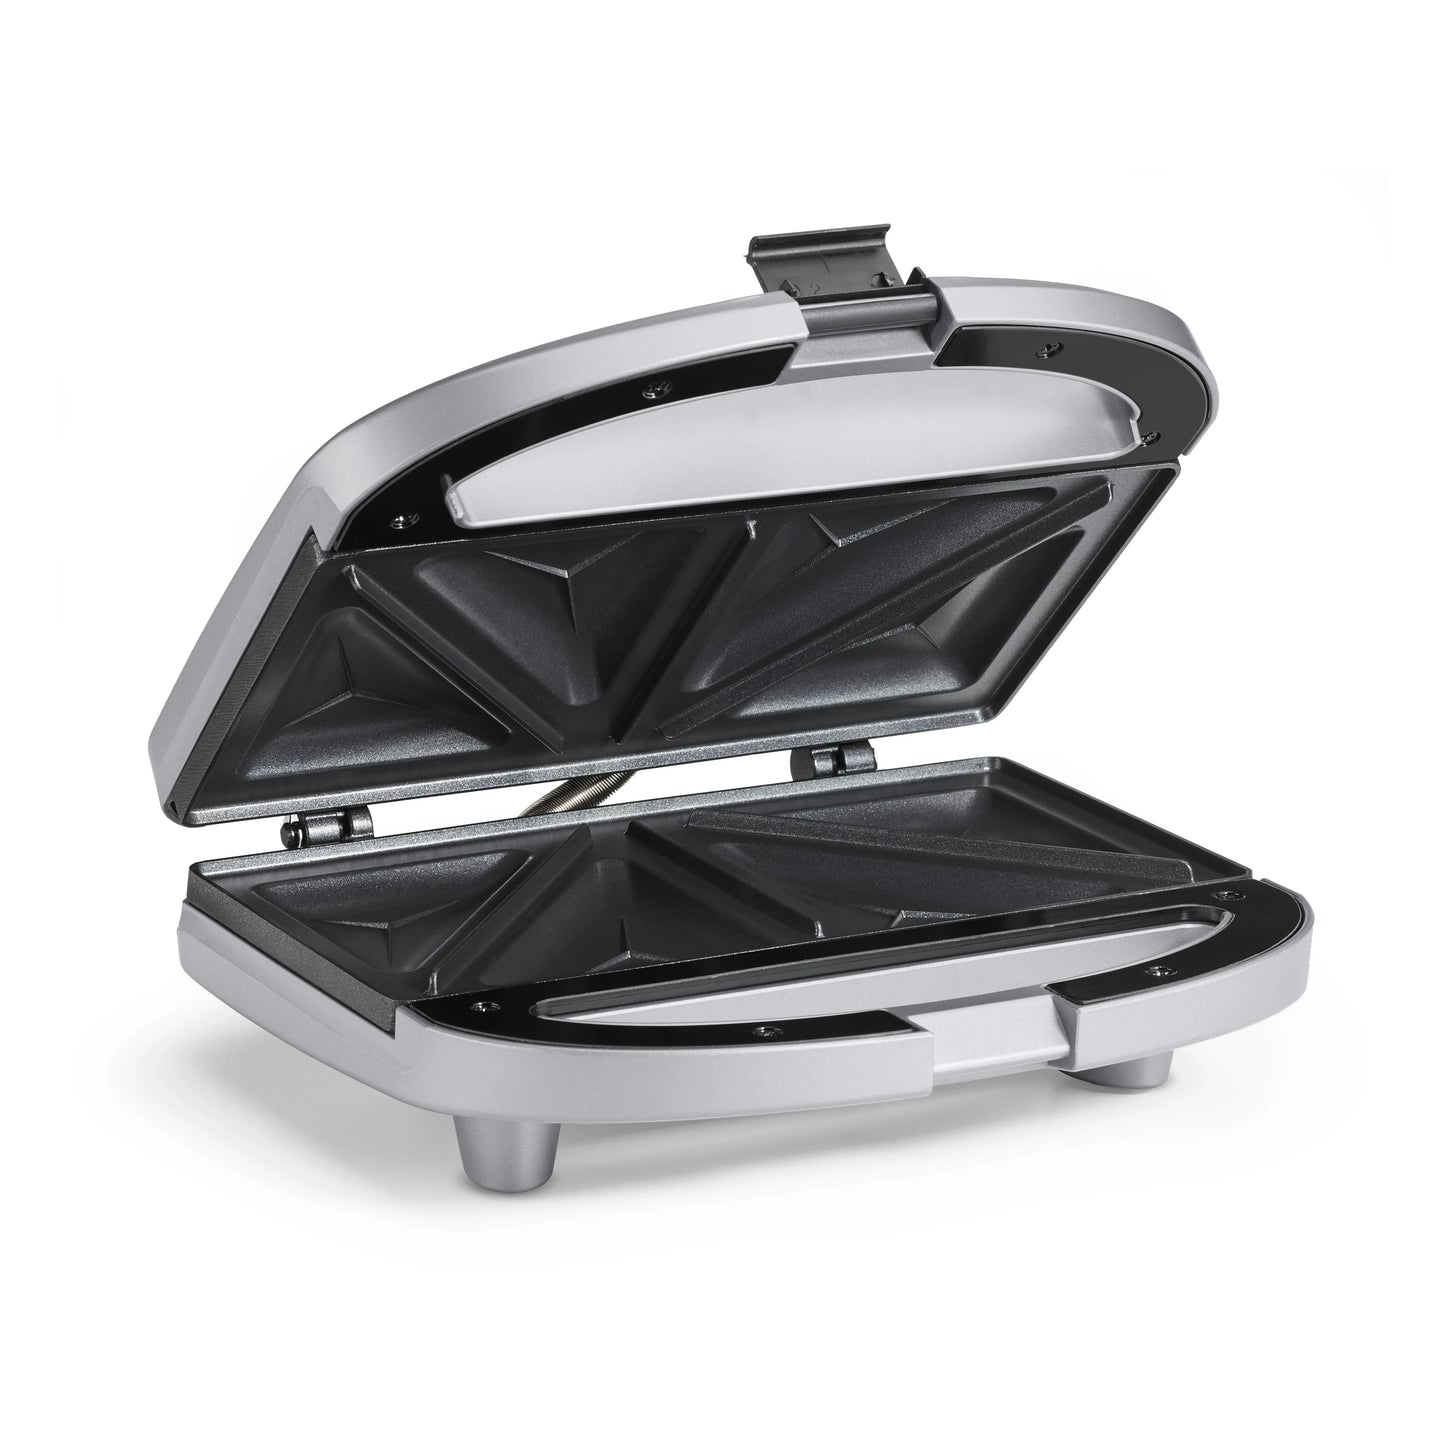 Electric Tabletop Grill Sandwich Brushed Chrome - grills 2 sandwiches